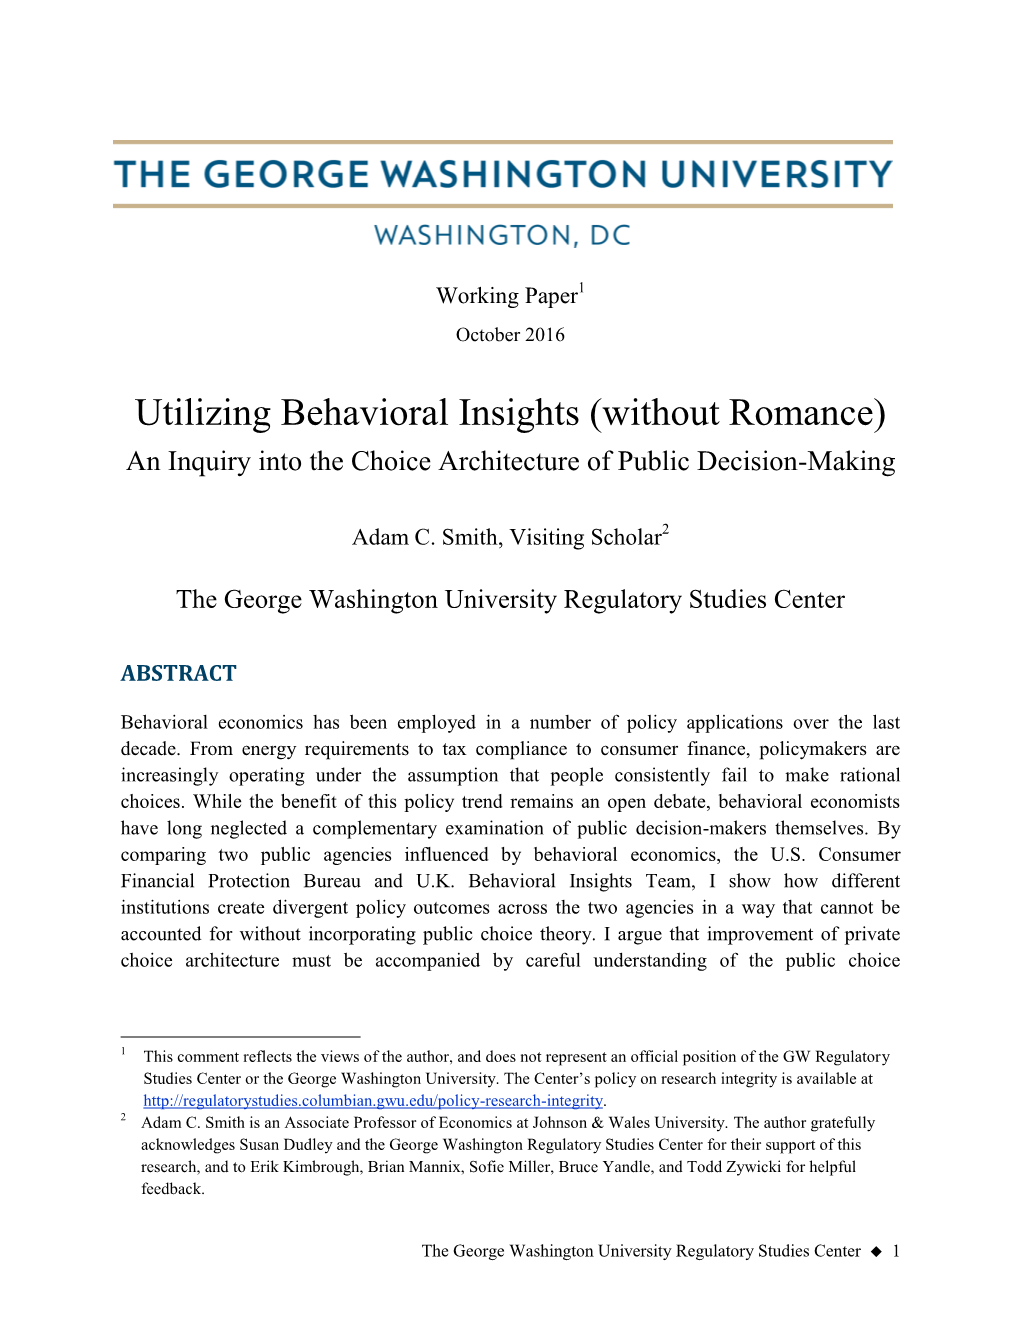 Utilizing Behavioral Insights (Without Romance) an Inquiry Into the Choice Architecture of Public Decision-Making